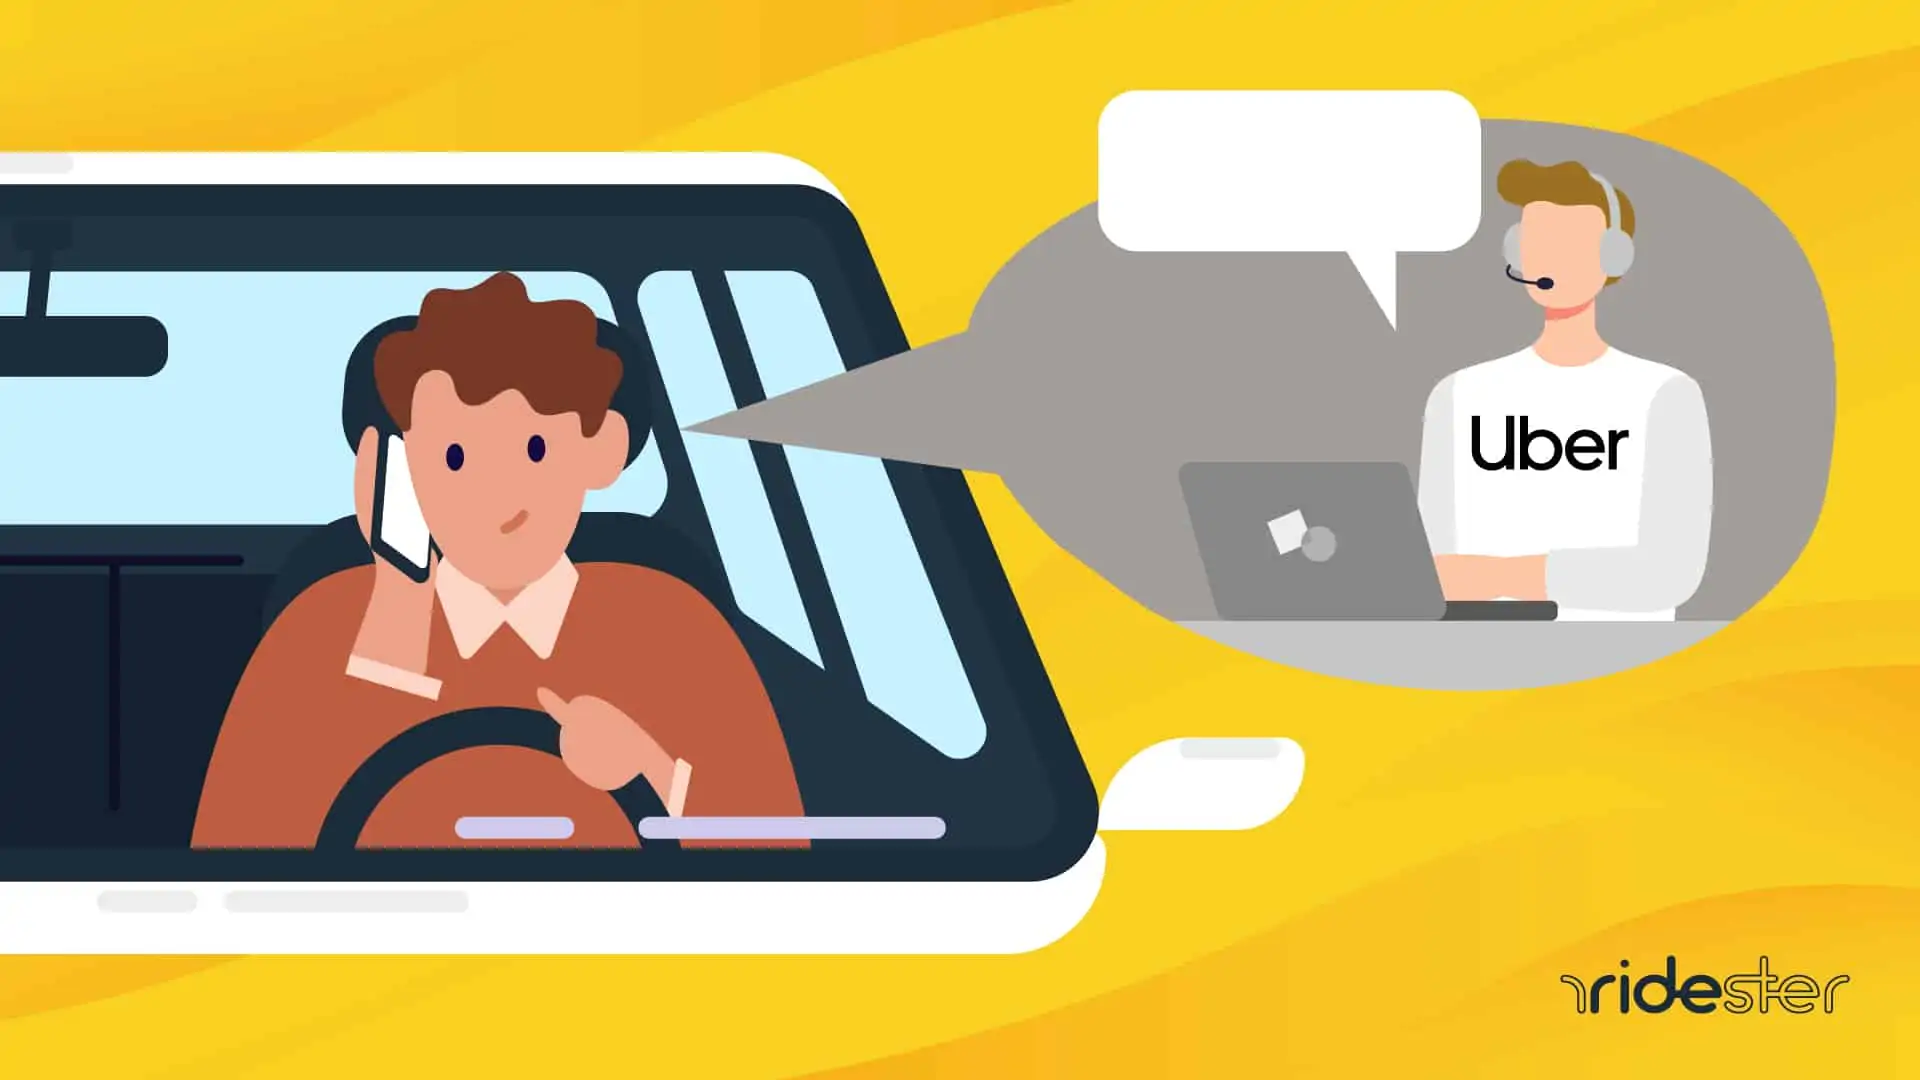 Vector graphic showing a confused Uber driver speaking with Uber driver support on the phone